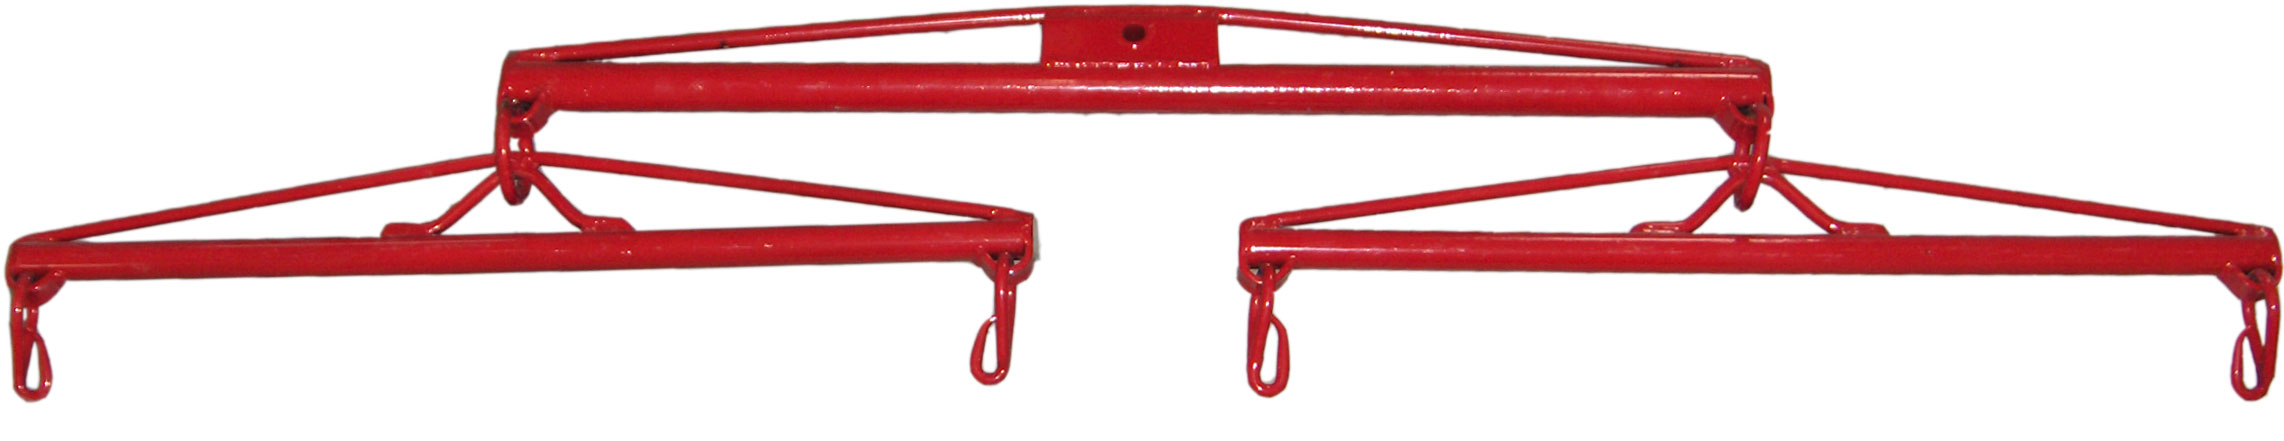 42" ROUND STEEL DOUBLE TREE W/CLEVIS - RED